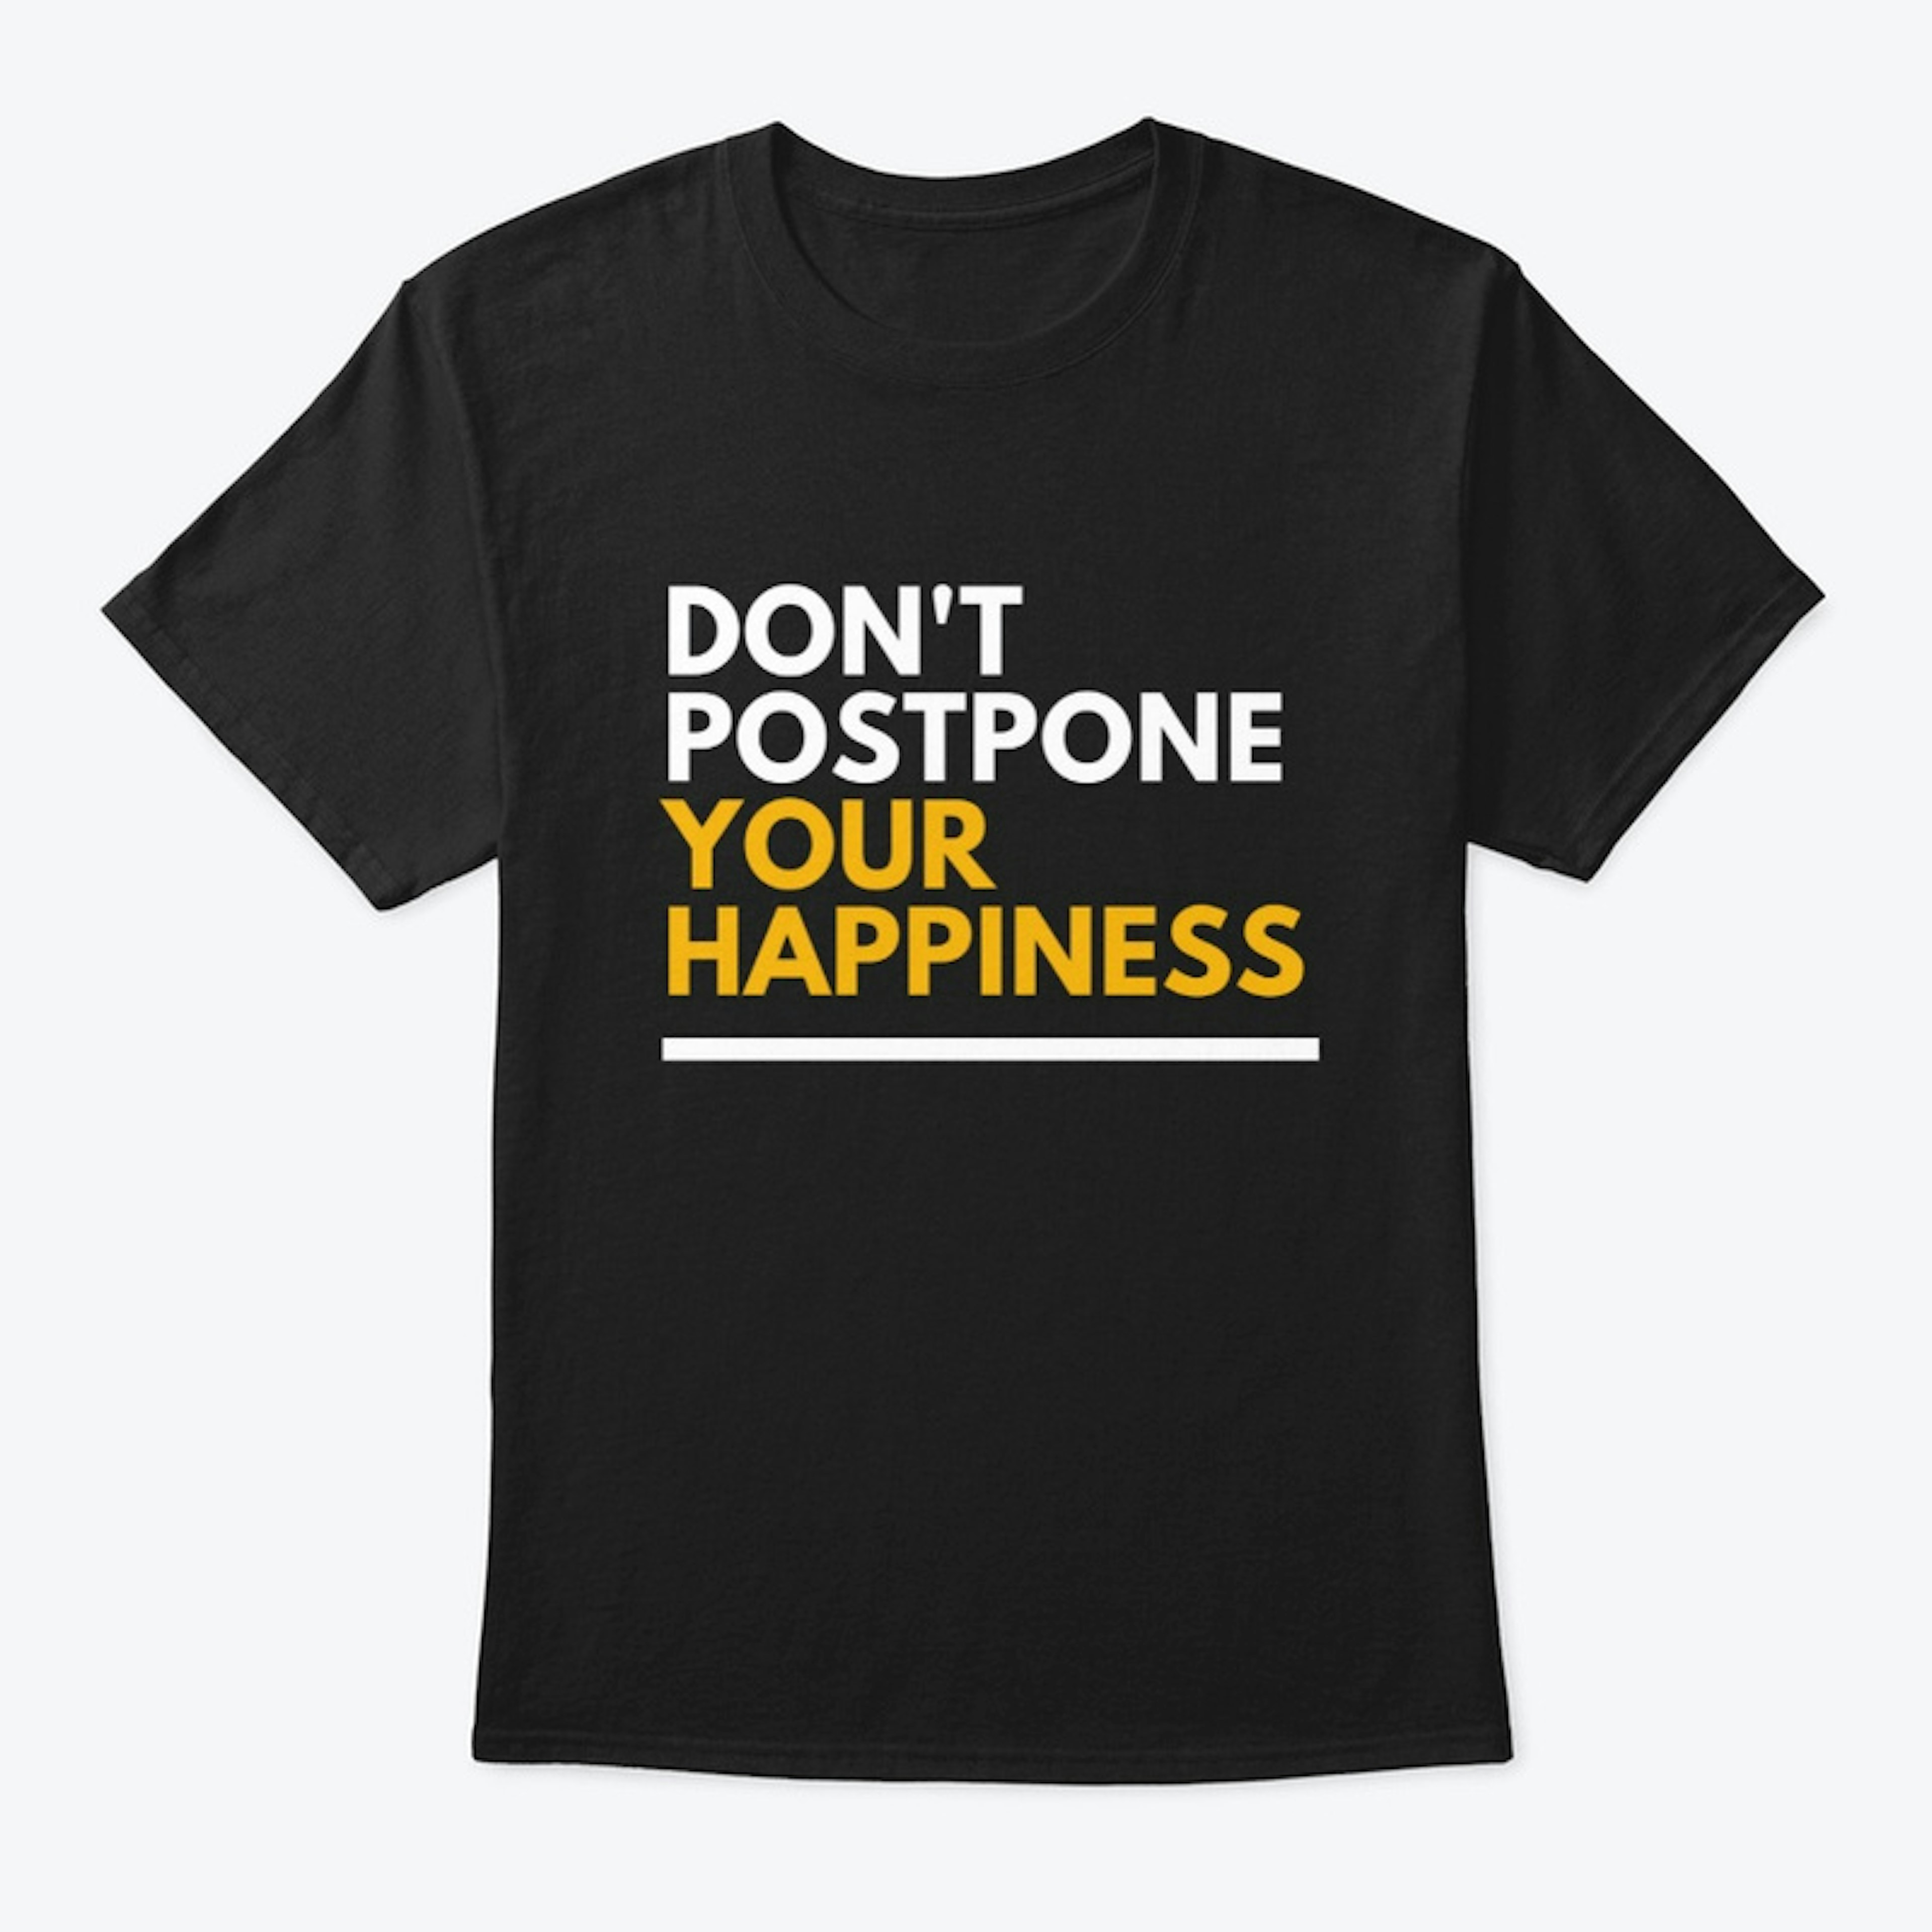 Don't postpone your happiness T shirt